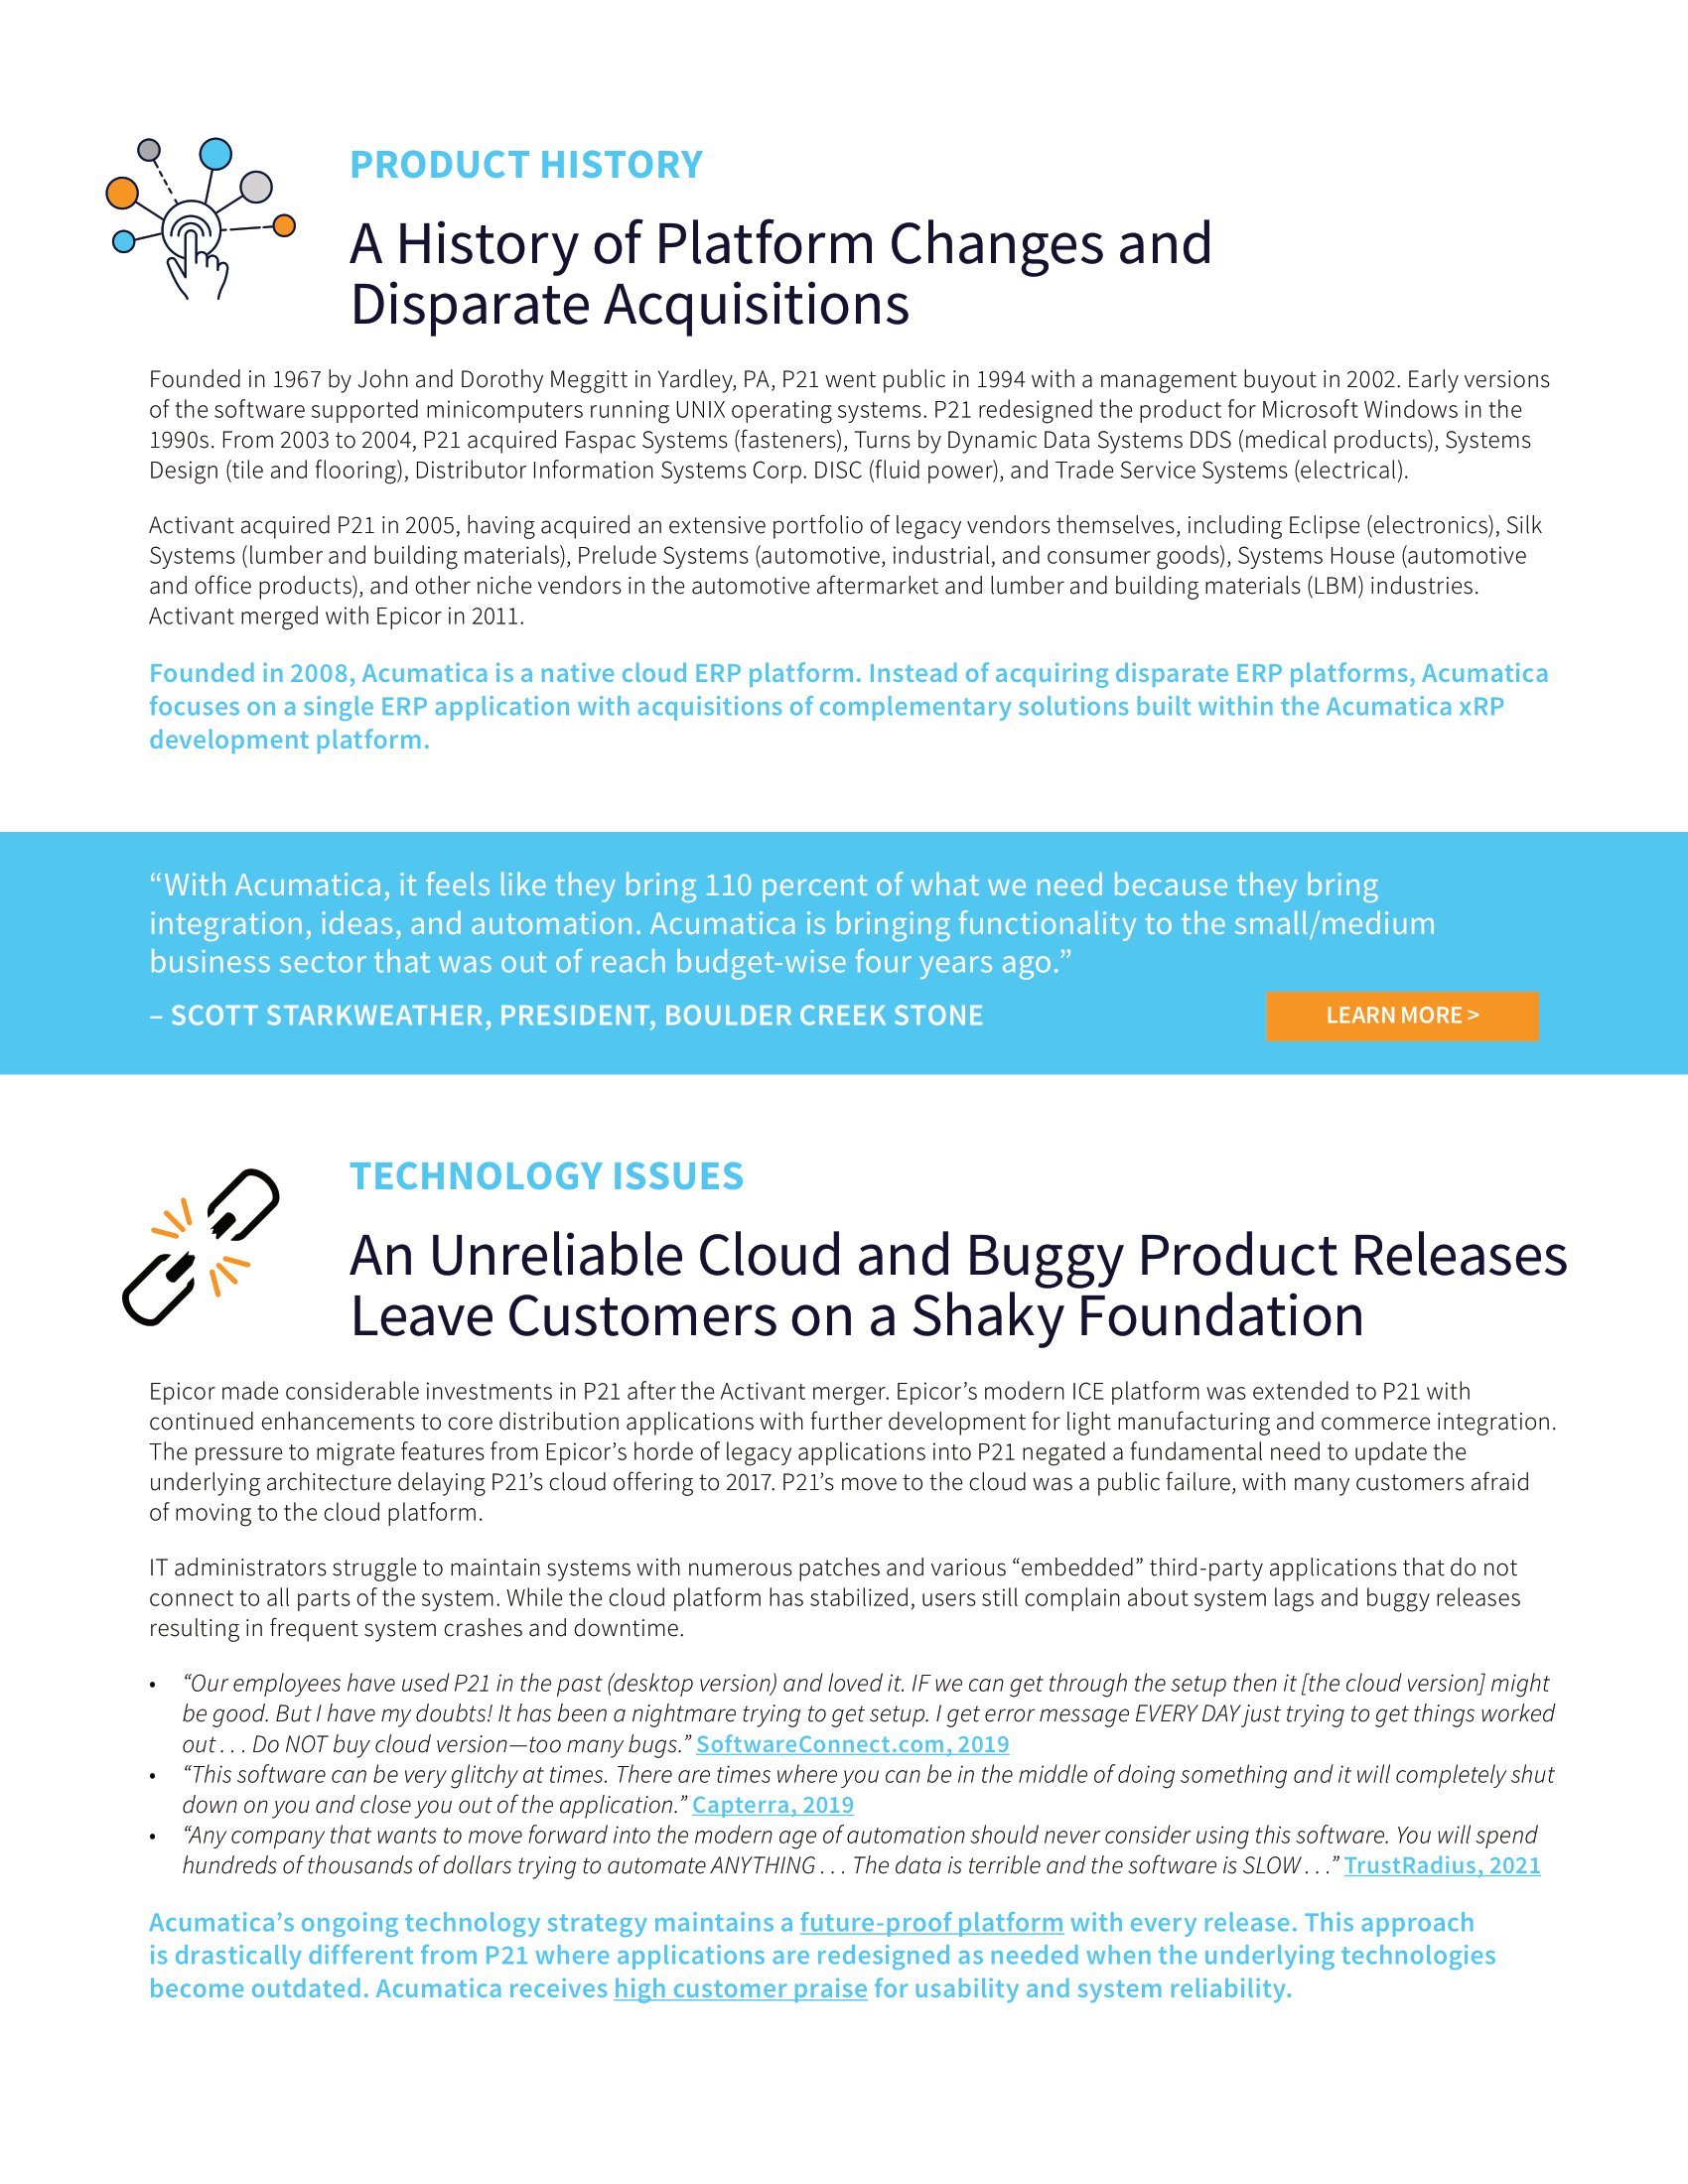 Wholesale Distributors: Discover the Pros and Cons of Acumatica and Epicor Prophet 21, page 1